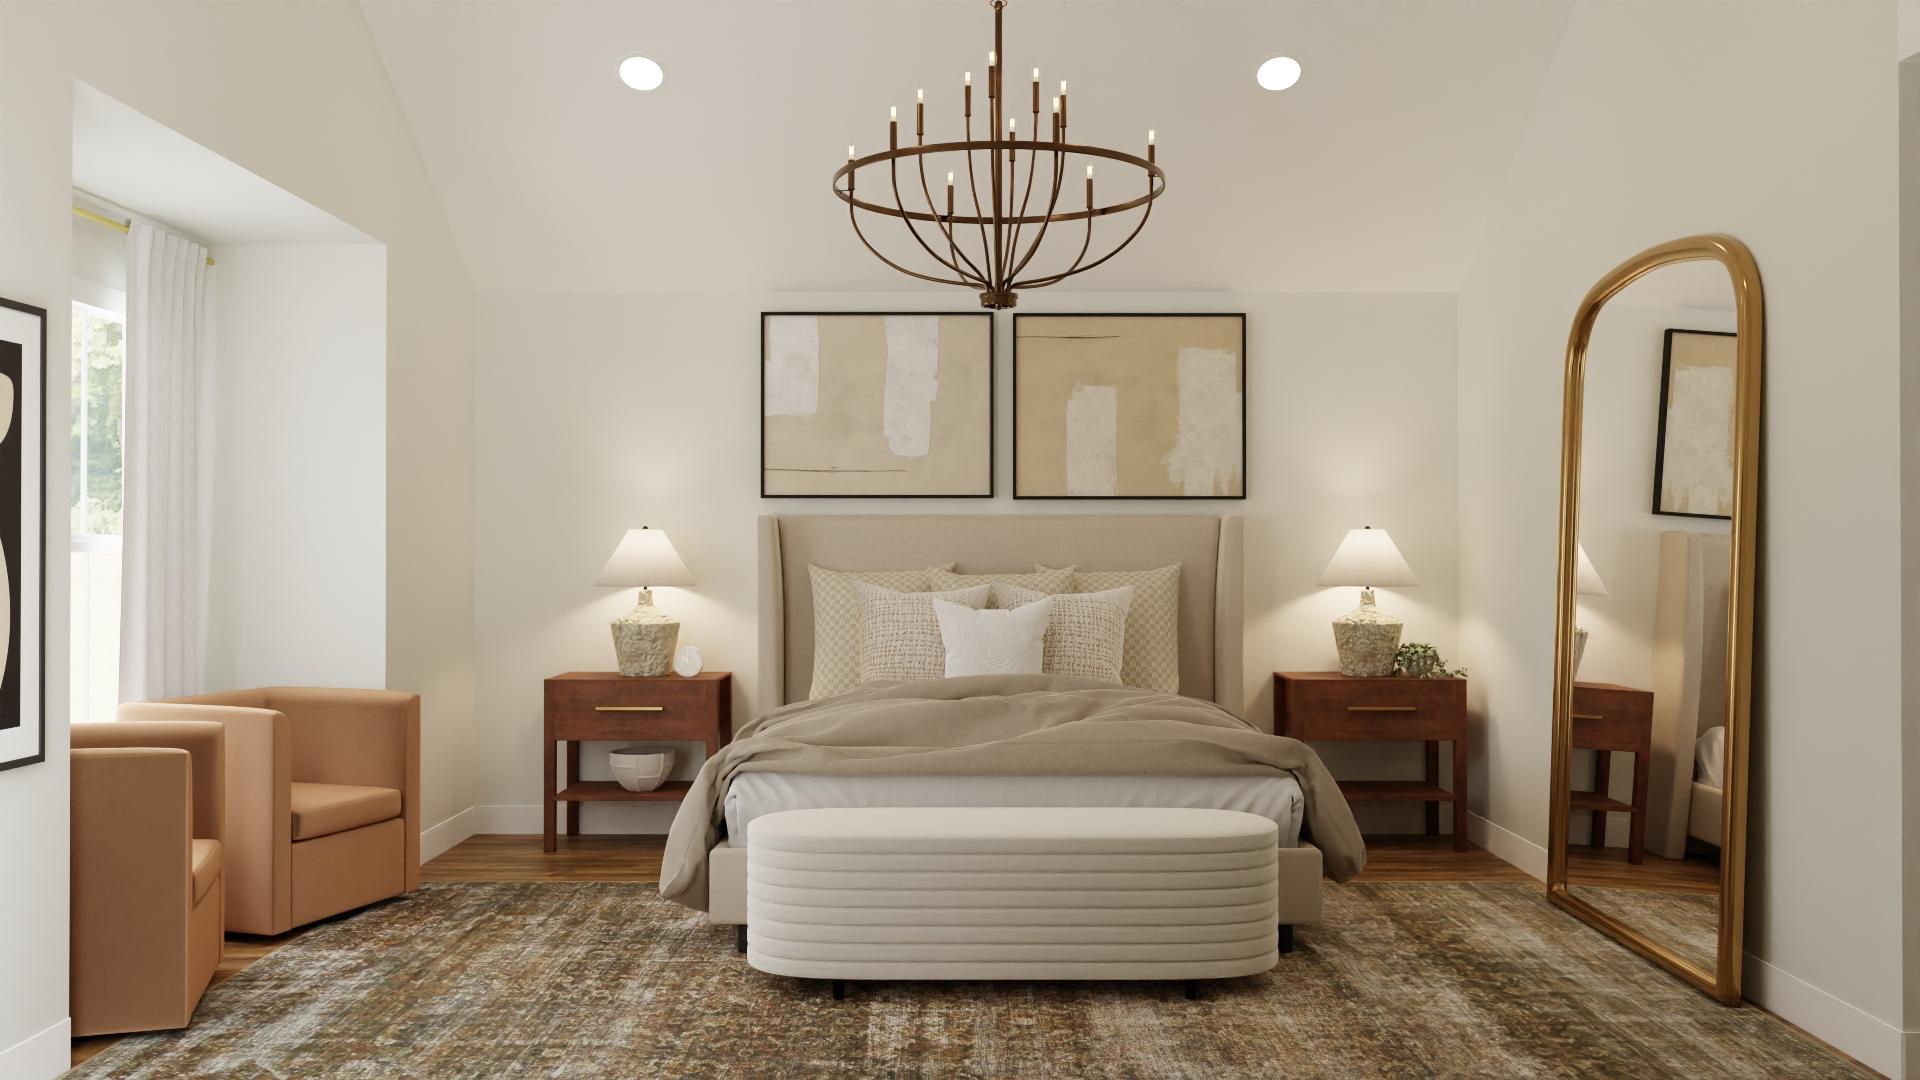 Transitional Eclectic Bedroom with Chandelier